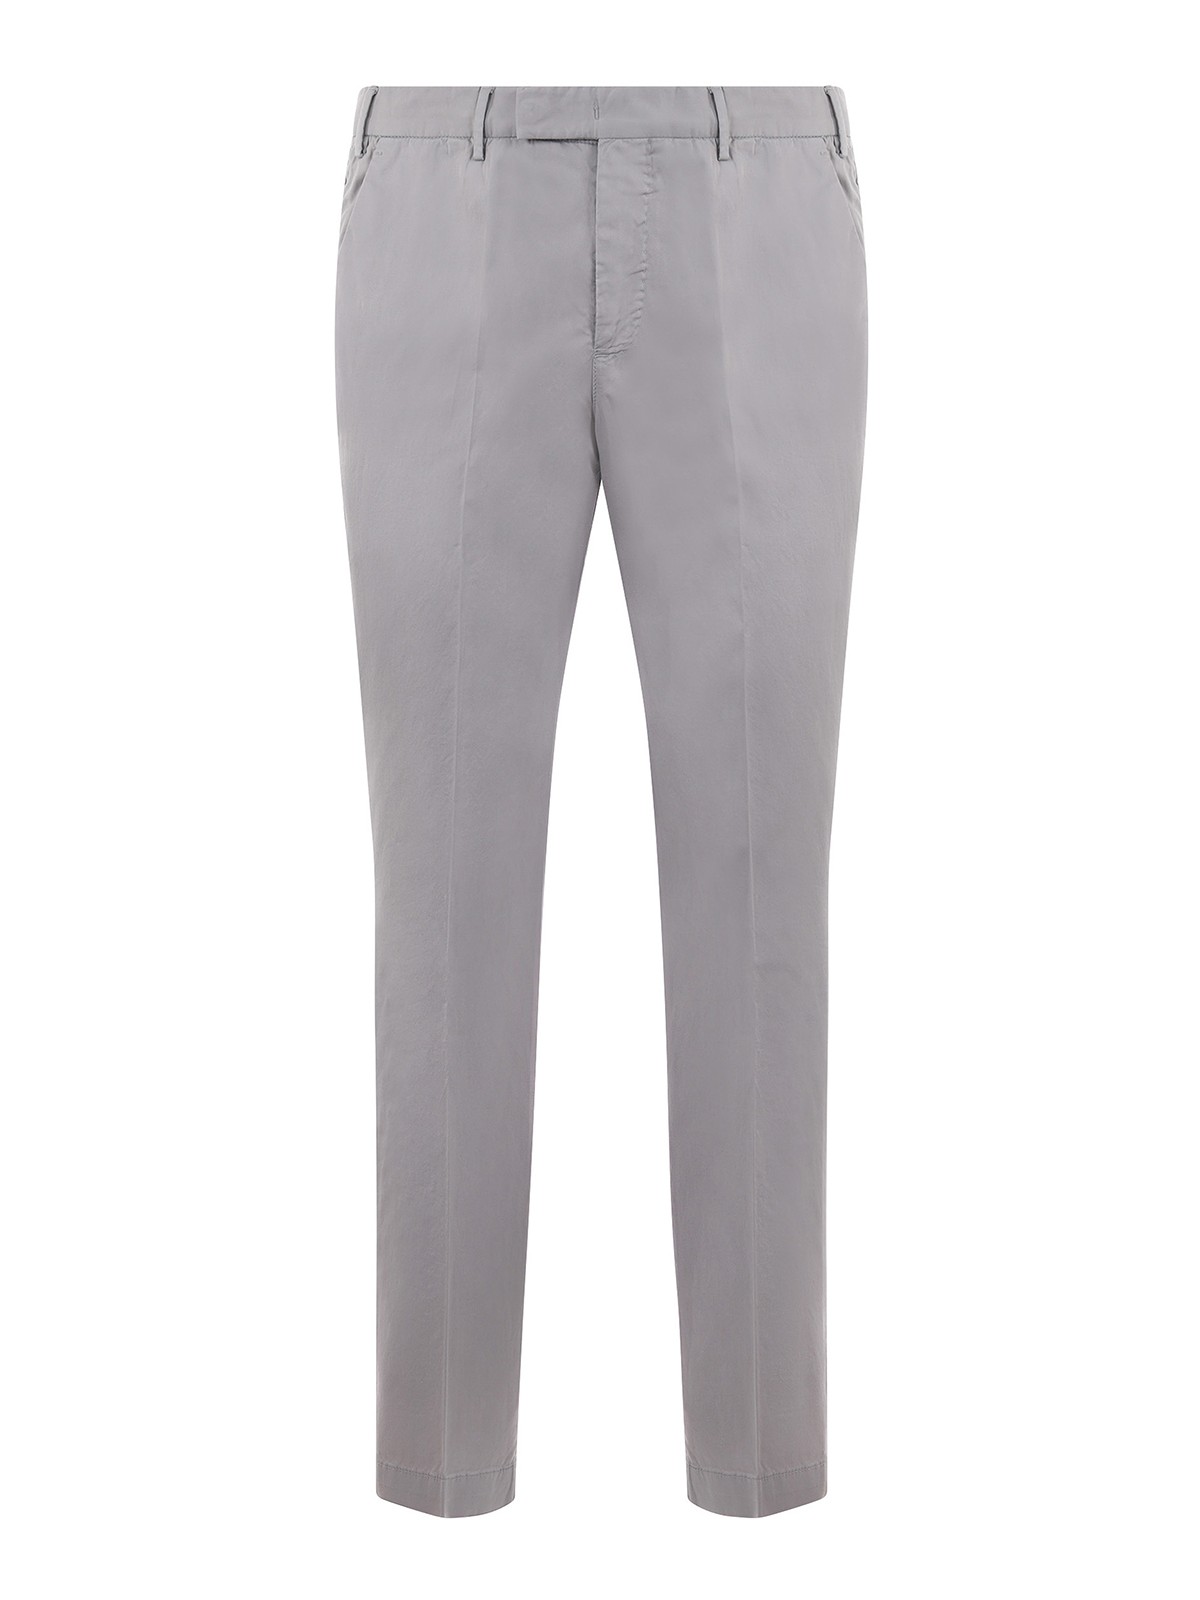 Pt Torino Cotton Trousers With Concealead Closure In Light Grey